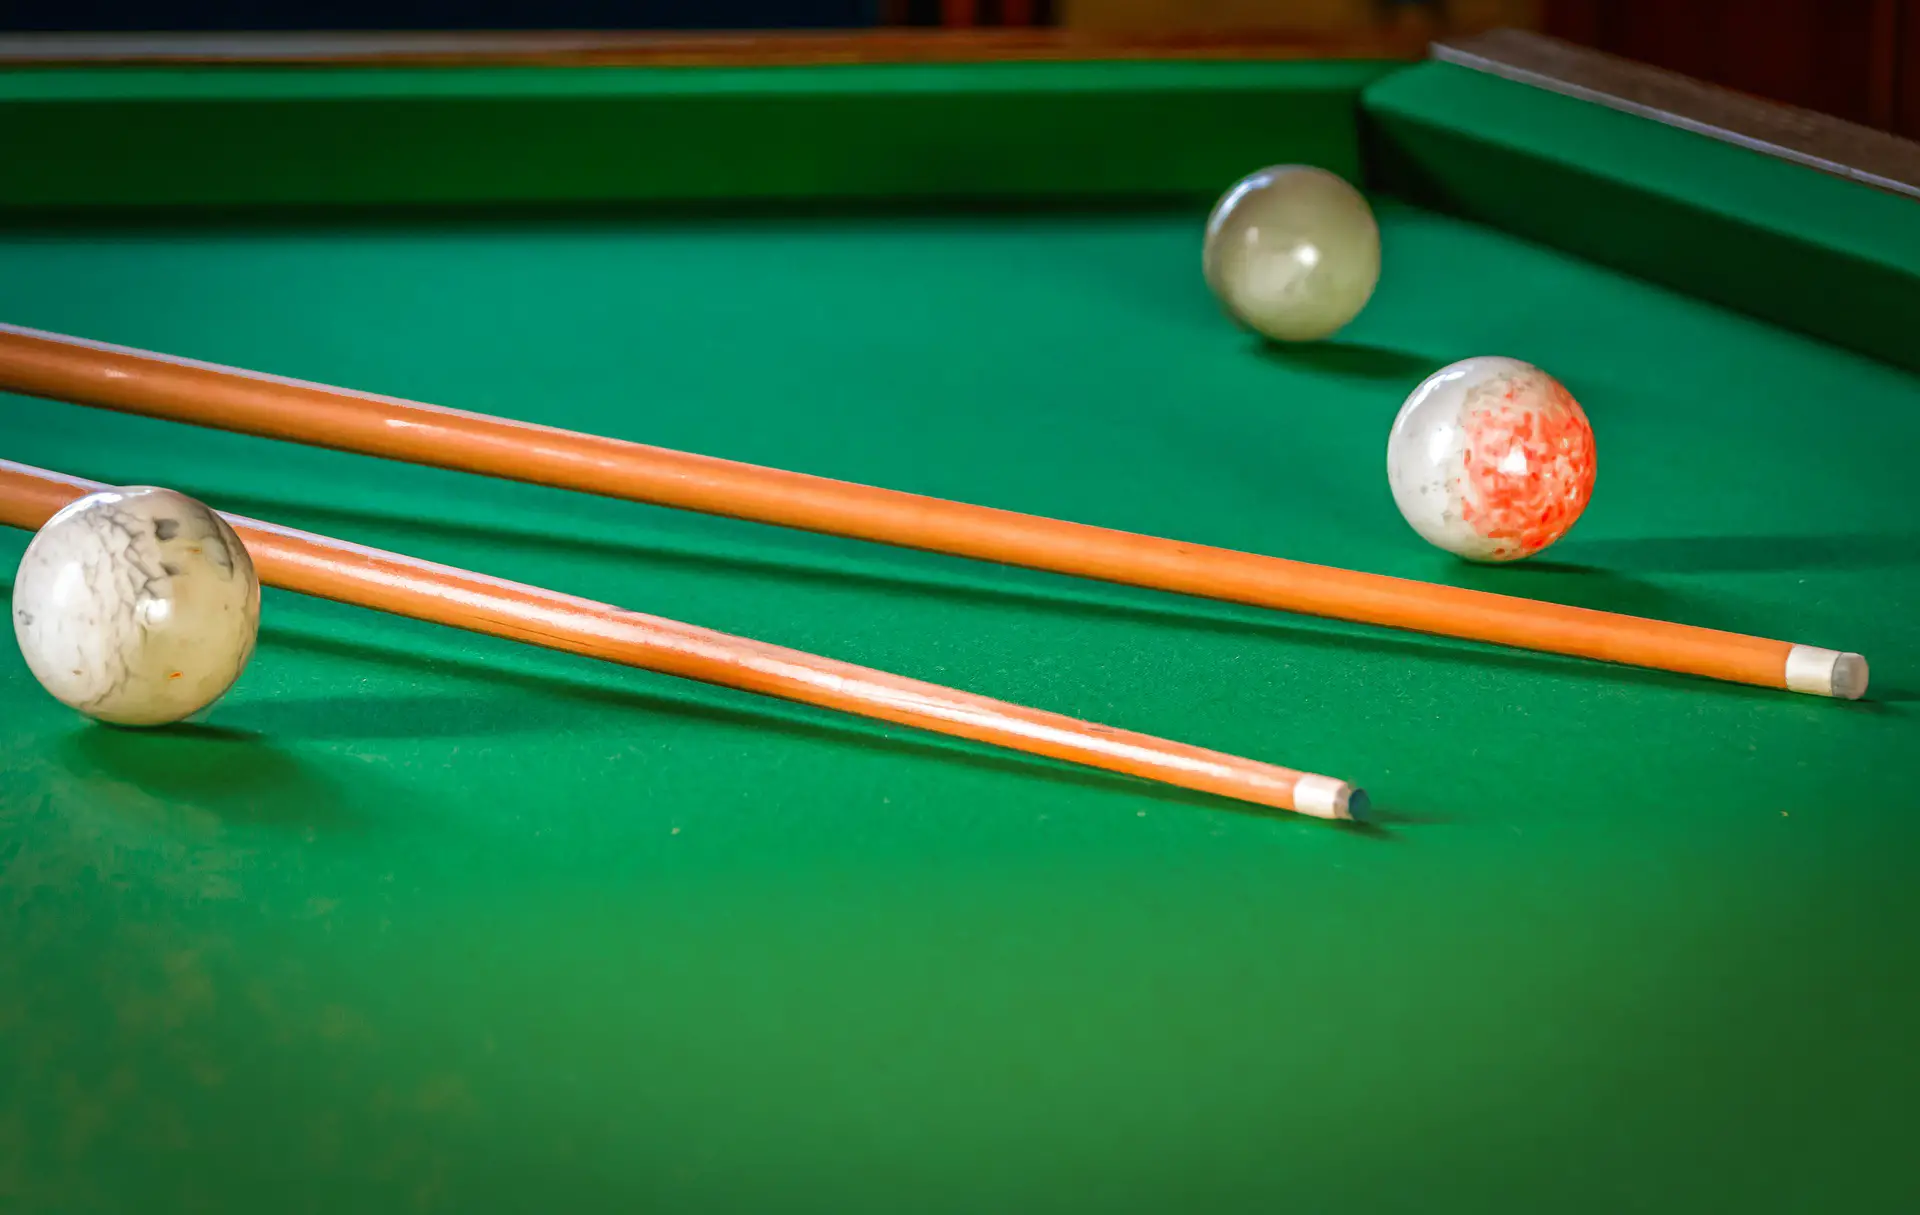 How To Make A Pool Cue – The Easy Way!